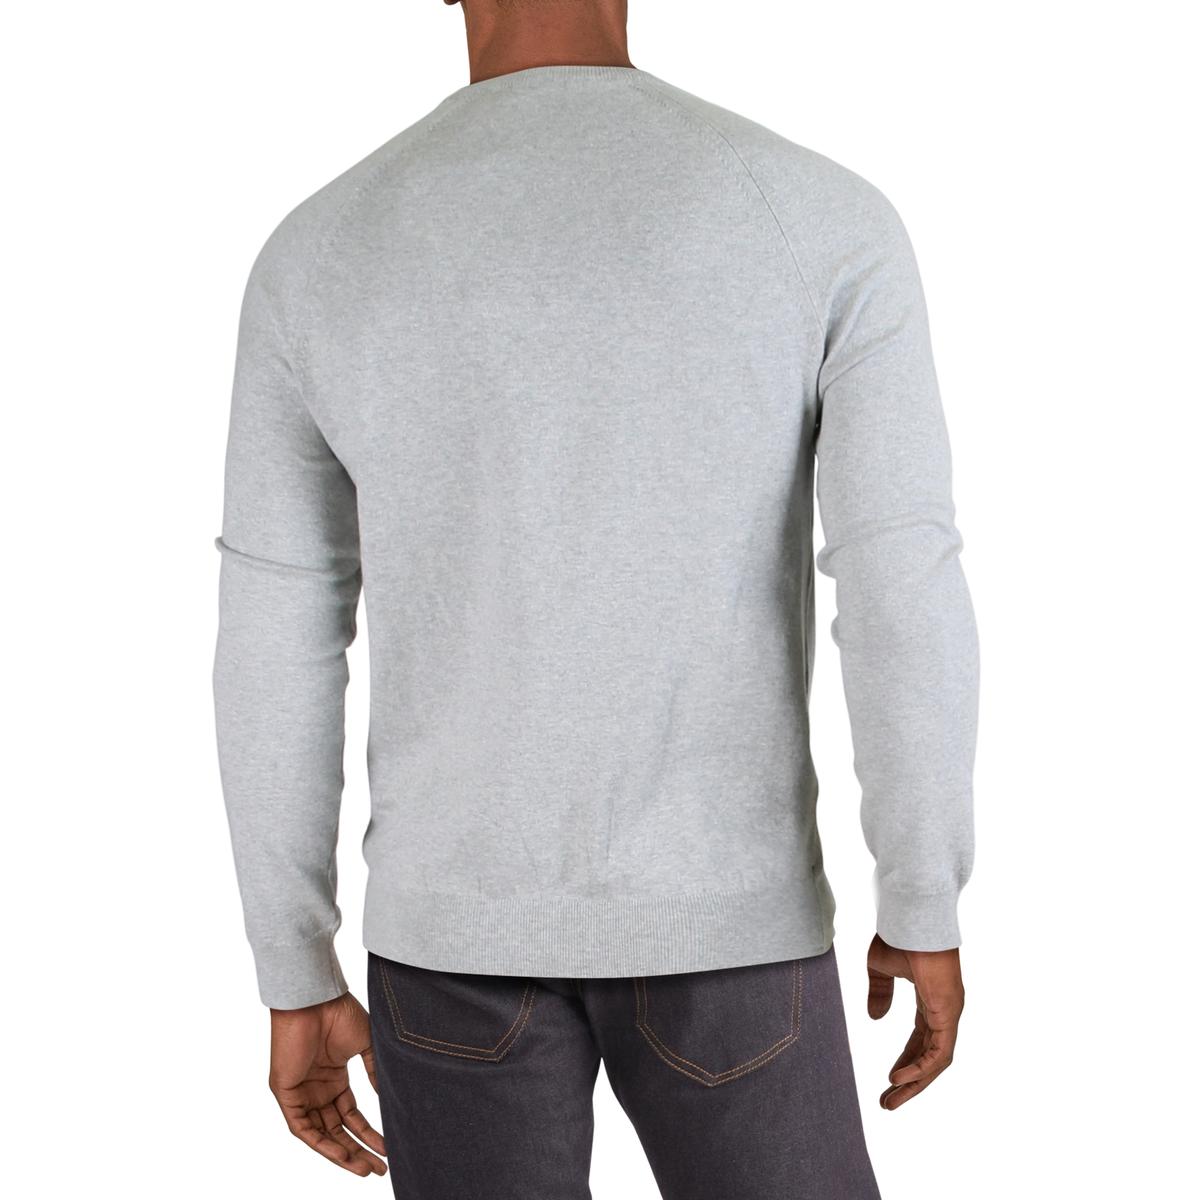 French Connection Men's Cotton Stretch Crewneck Pullover Sweater | eBay